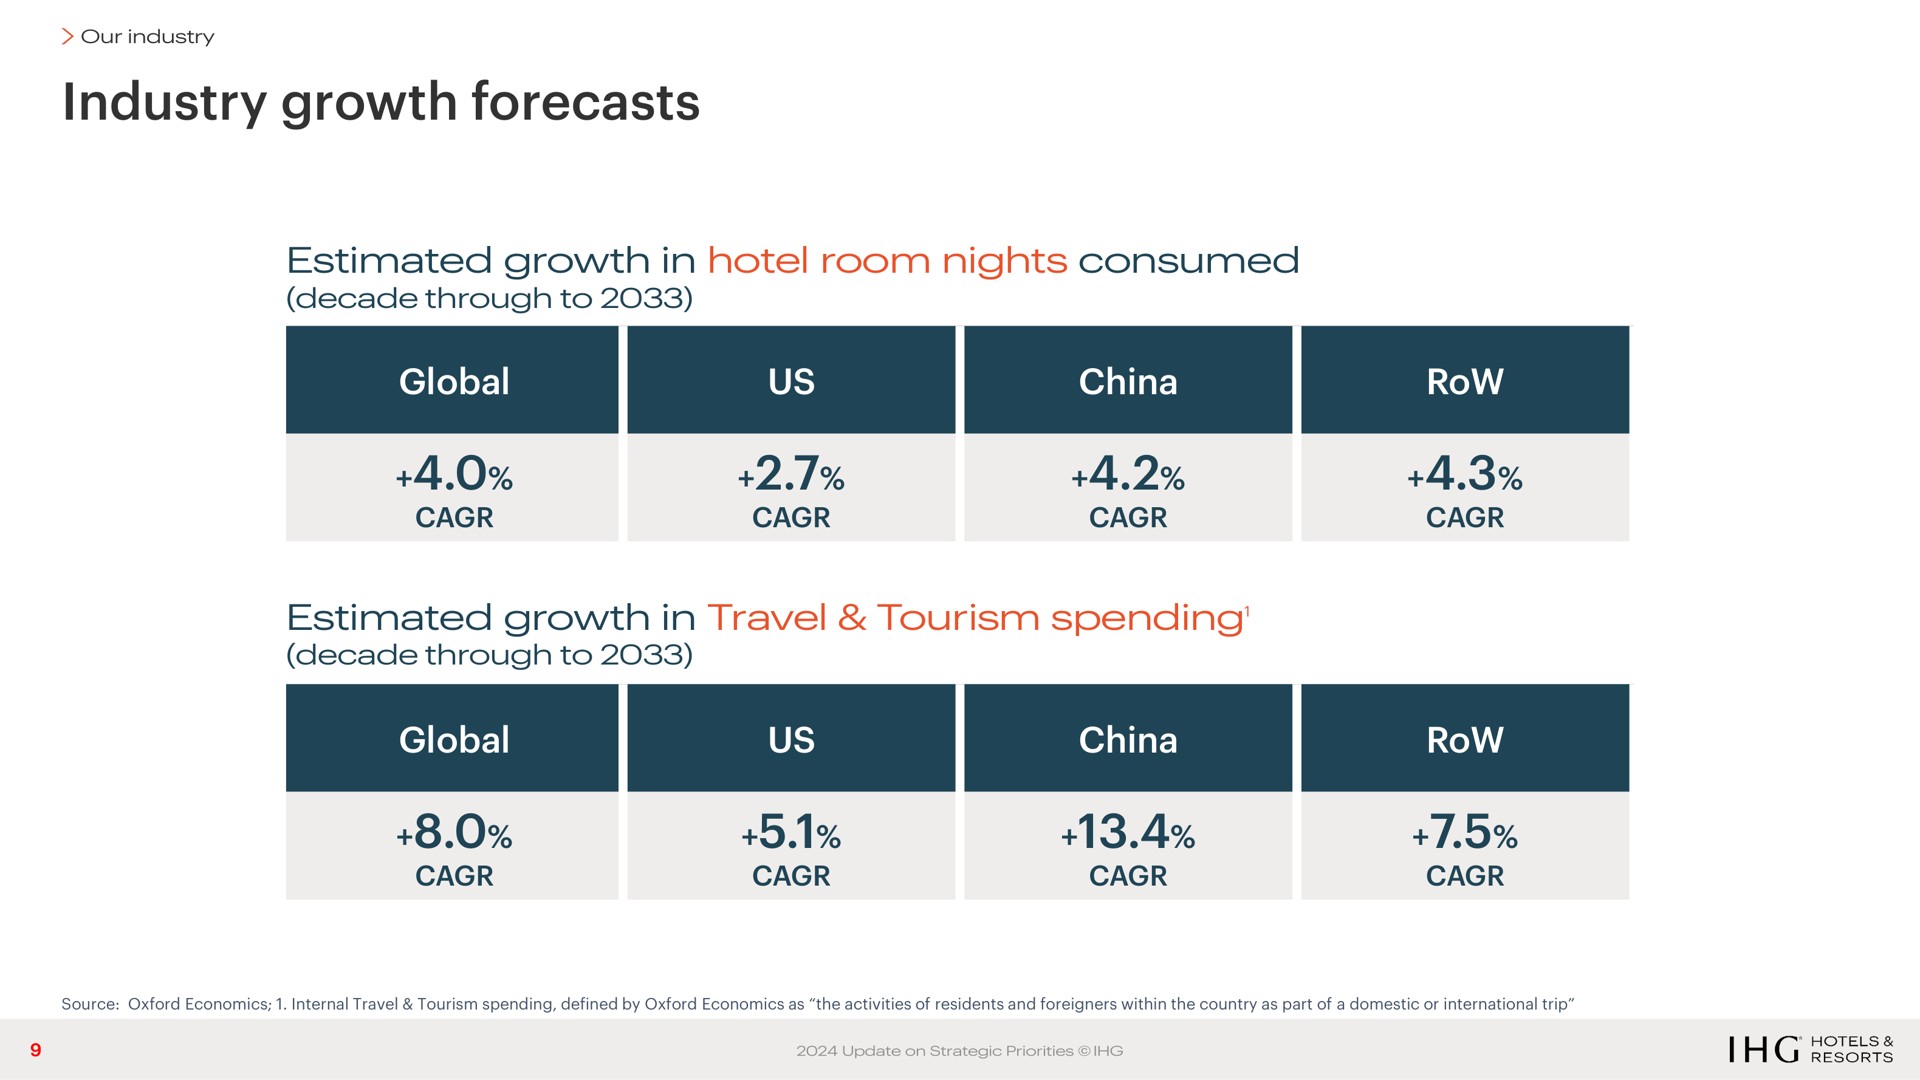 industry growth forecasts | IHG Hotels